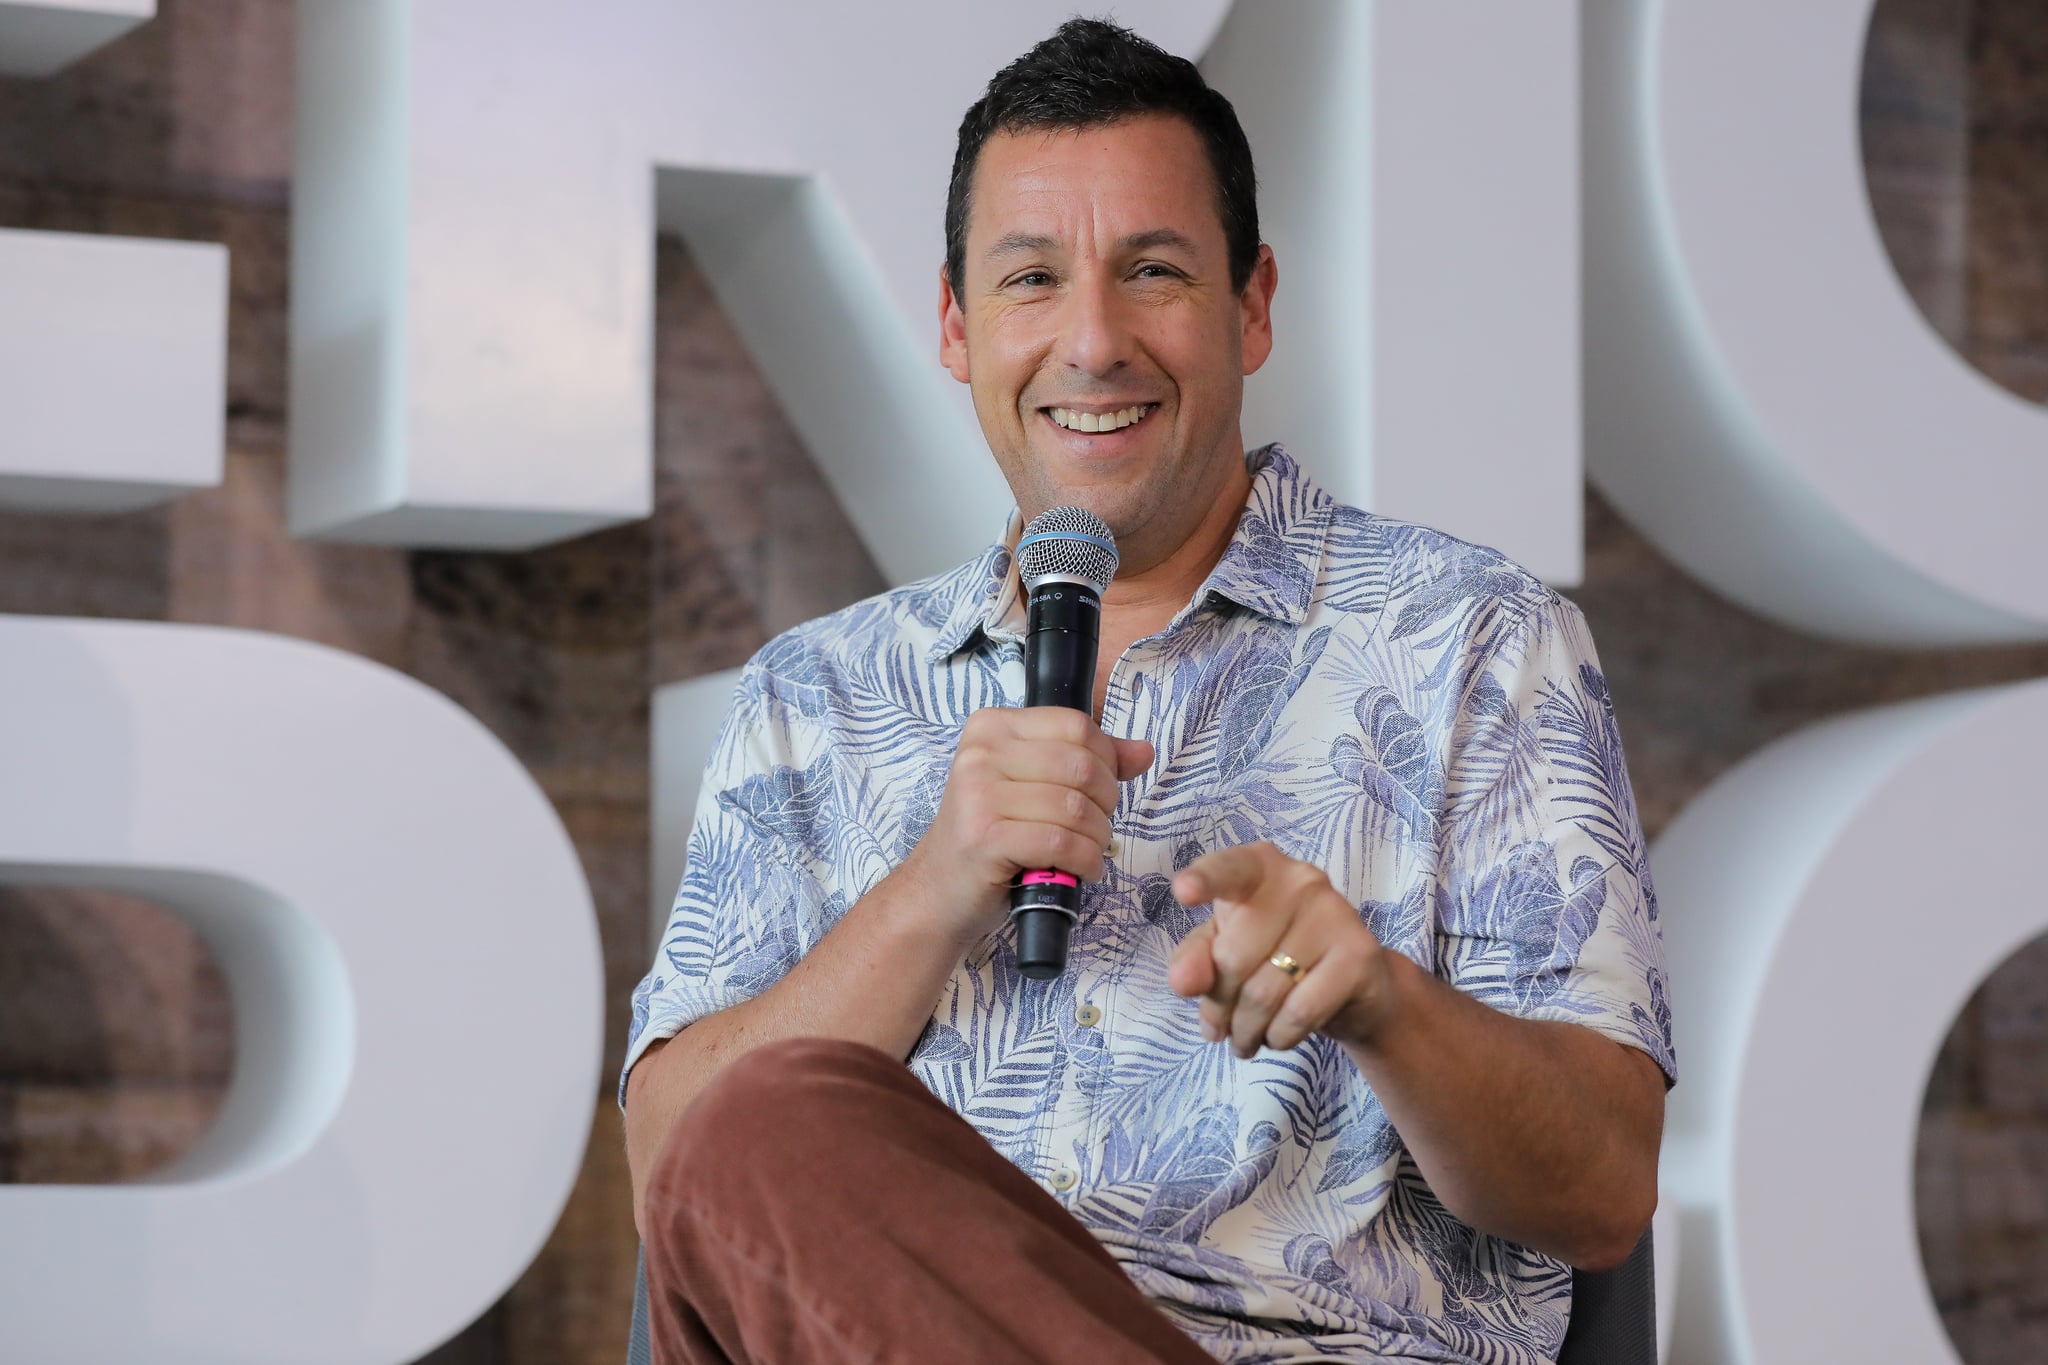 MEXICO CITY, MEXICO - JUNE 13: Adam Sandler speaks during the press conference of the new Netflix movie 'Murder Mystery' at St. Regis Hotel on June 13, 2019 in Mexico City, Mexico. (Photo by Hector Vivas/Getty Images for NETFLIX)